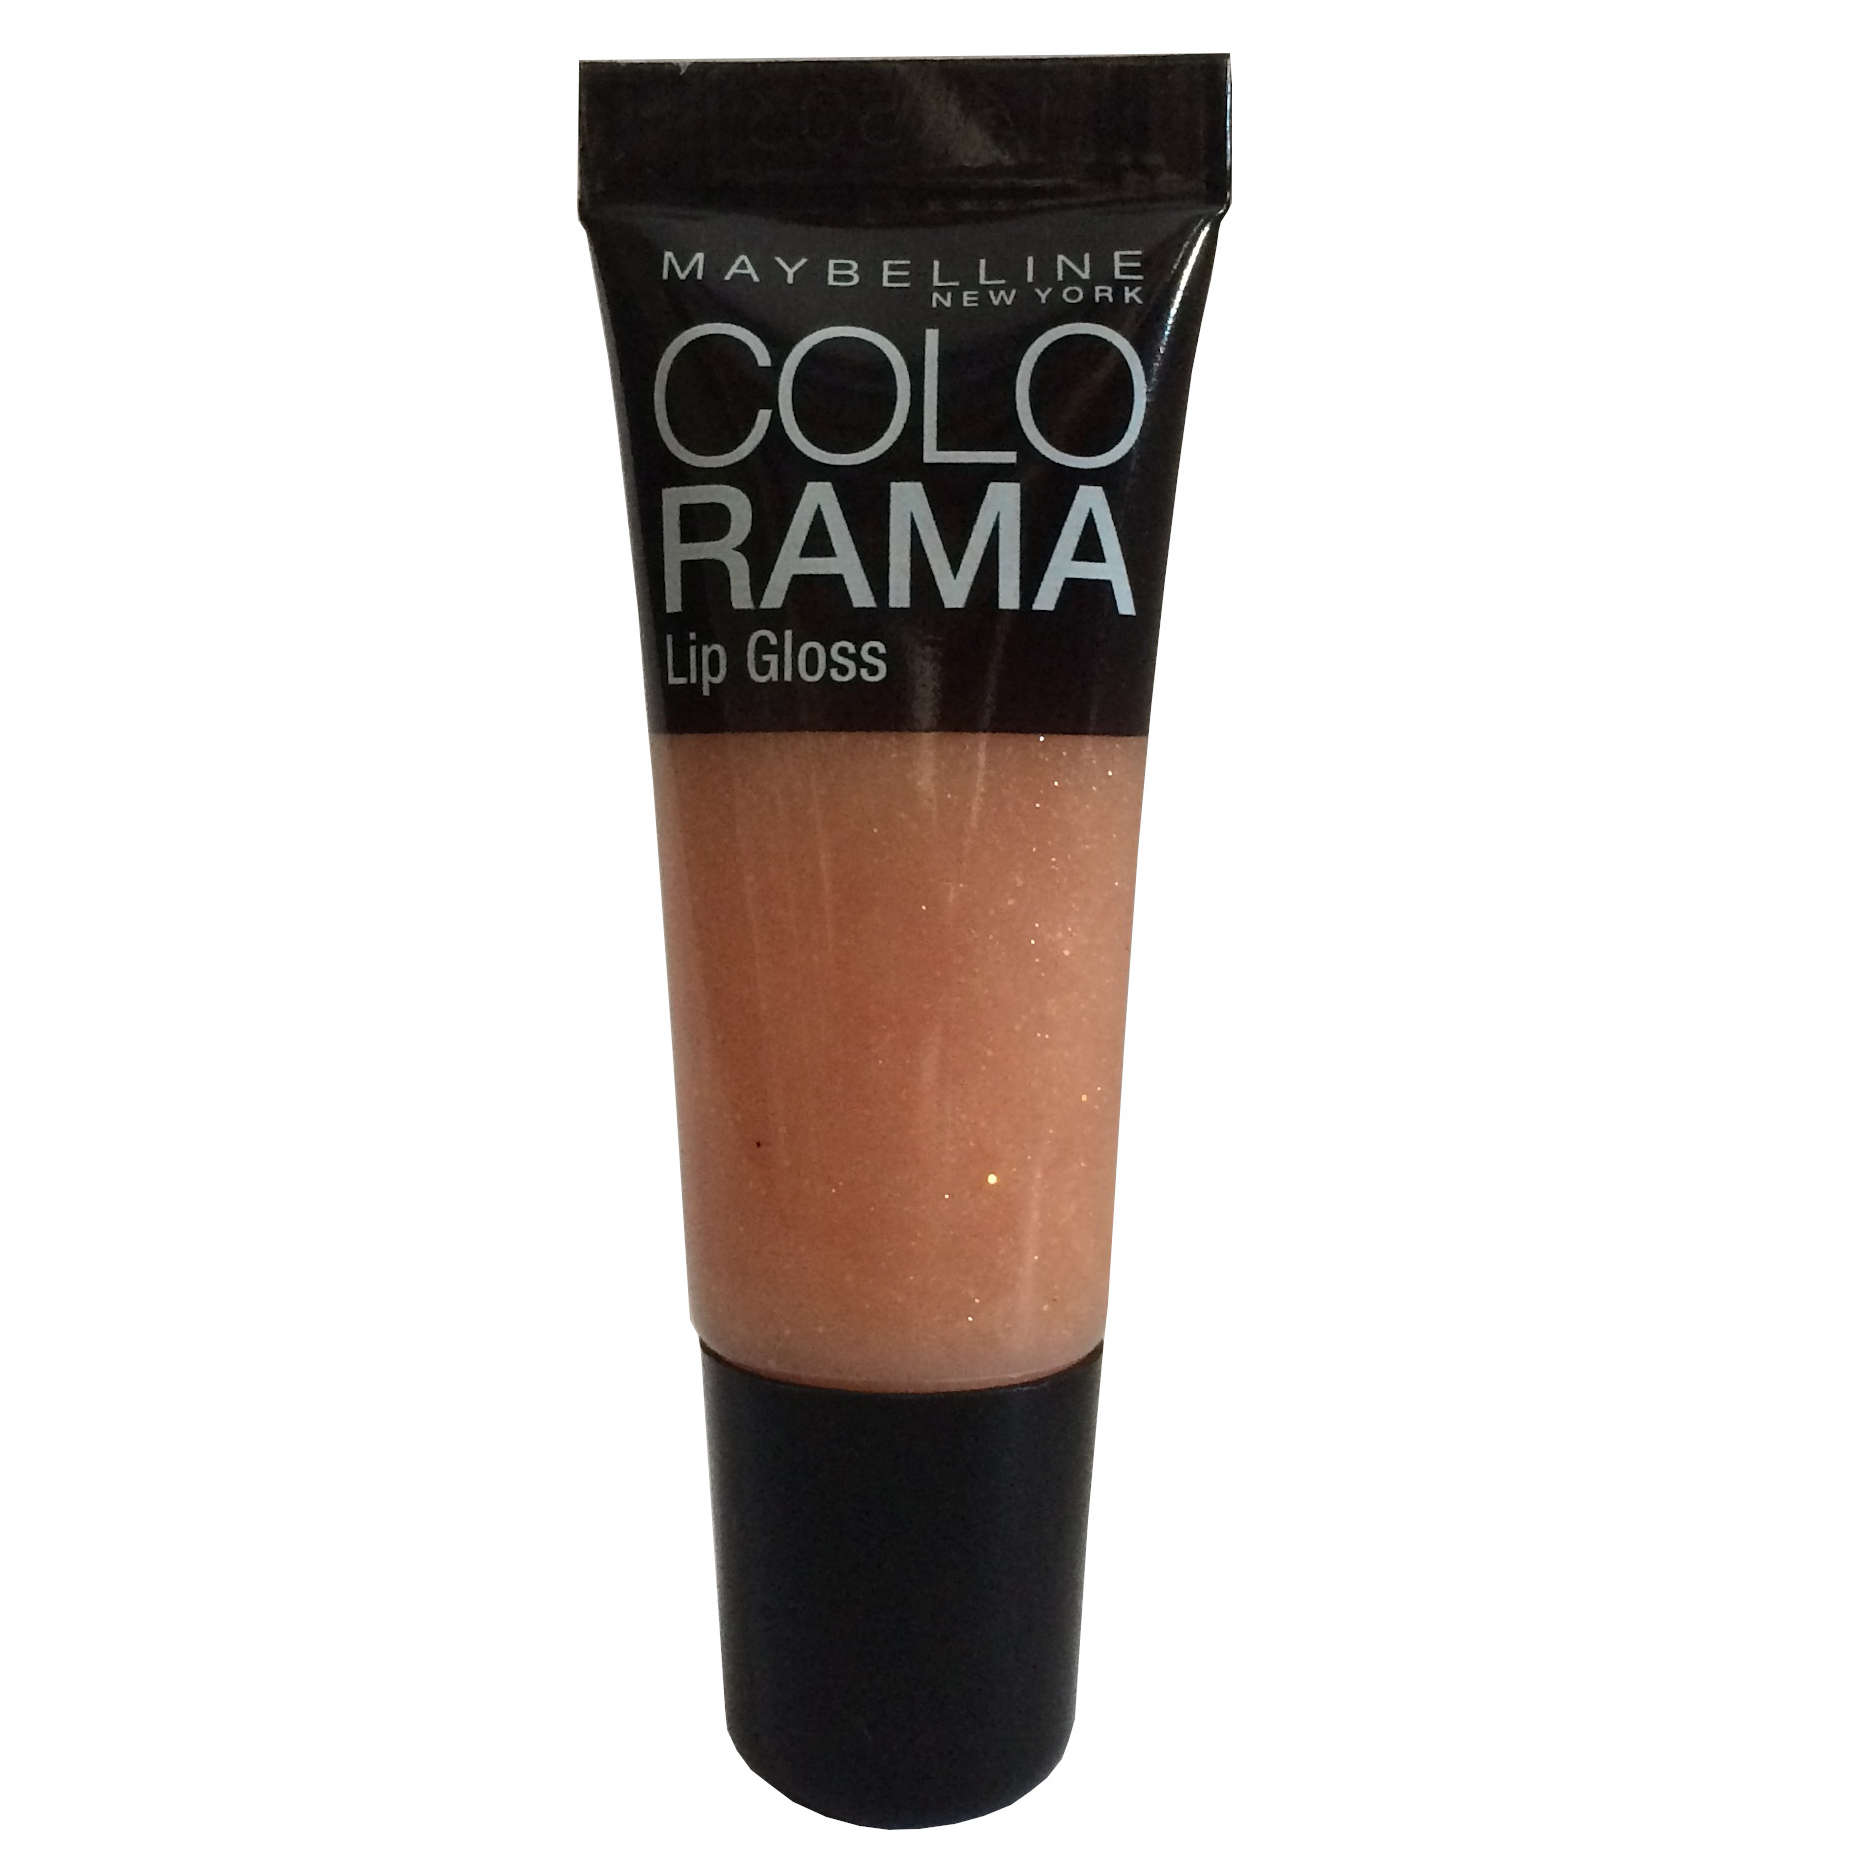 Maybelline Colorama Lip Gloss - 485 Sparkly Nude